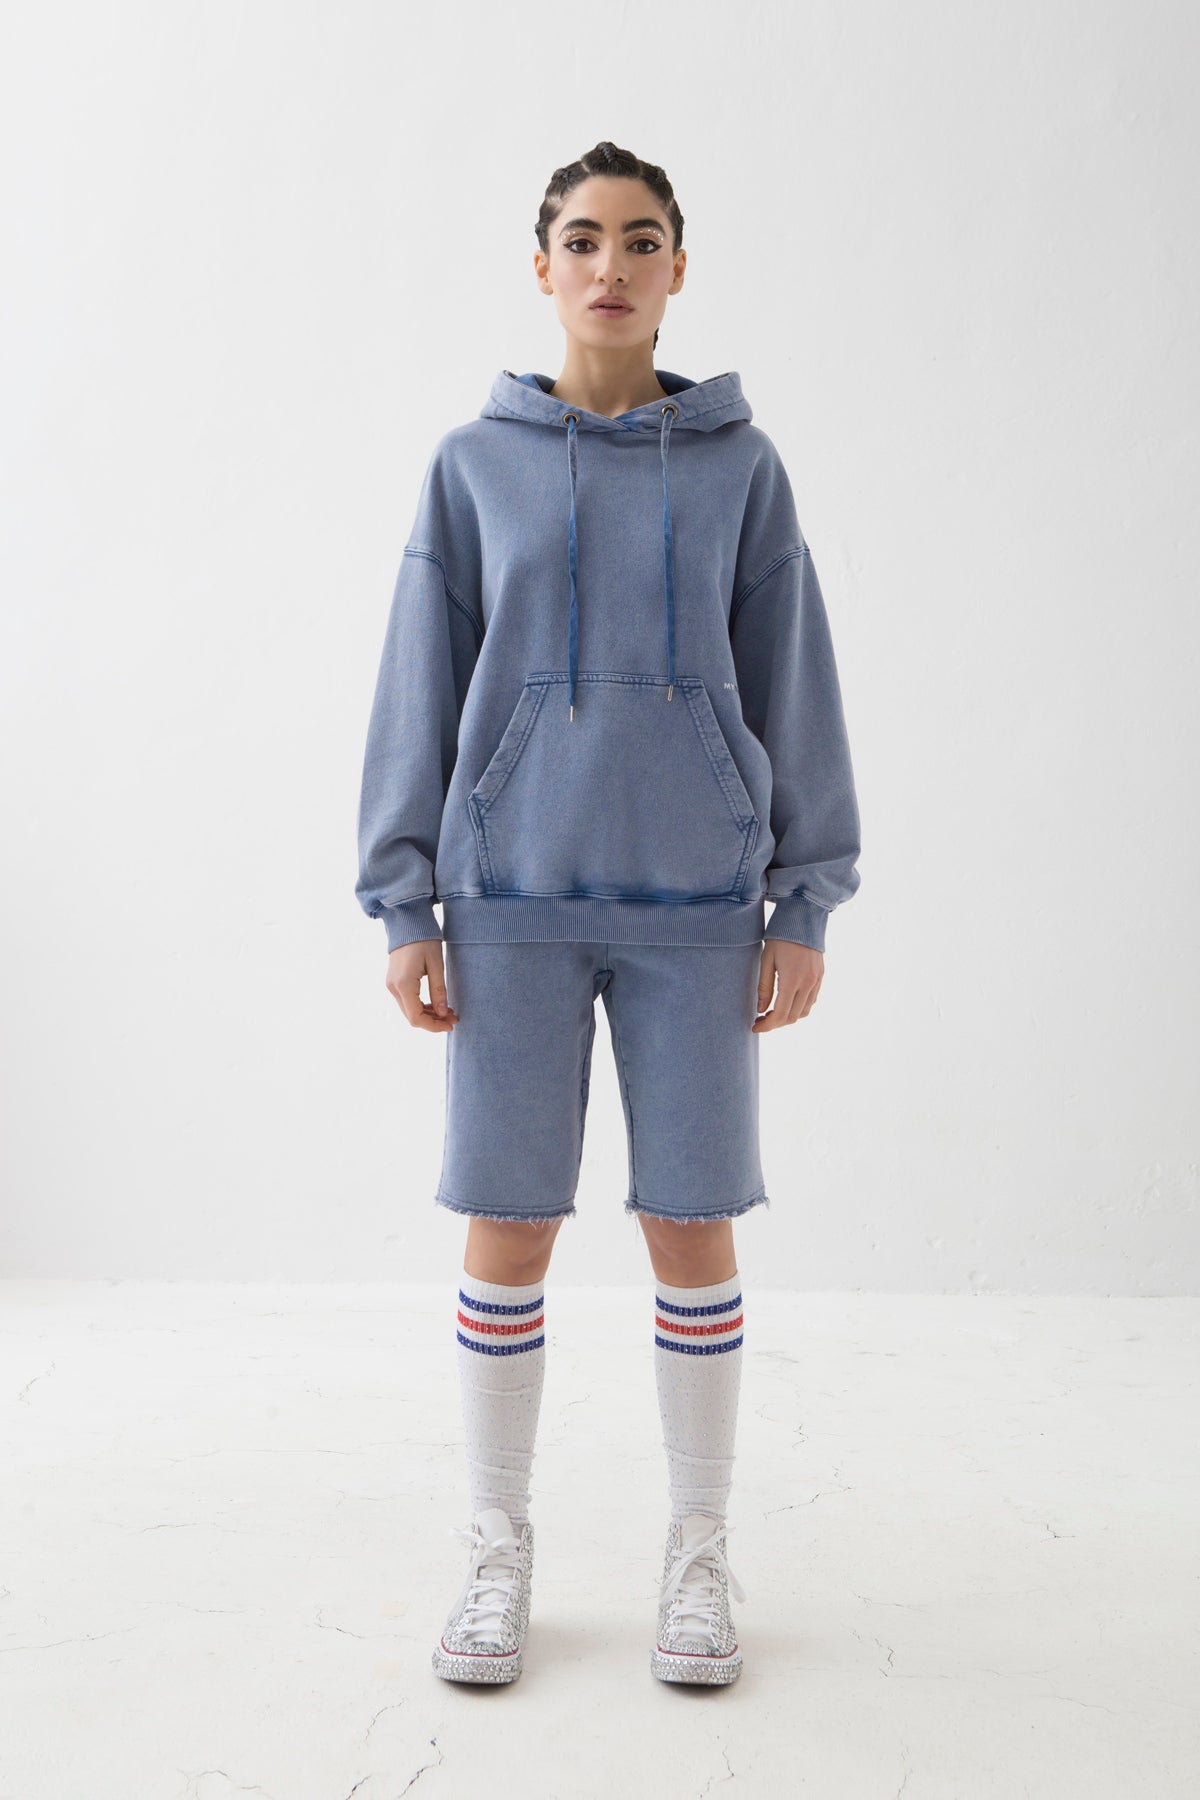 MYTRACKSUIT - HOODIE SWEATER / HIGH WAIST KNEE LENGHT PANTS BLUE